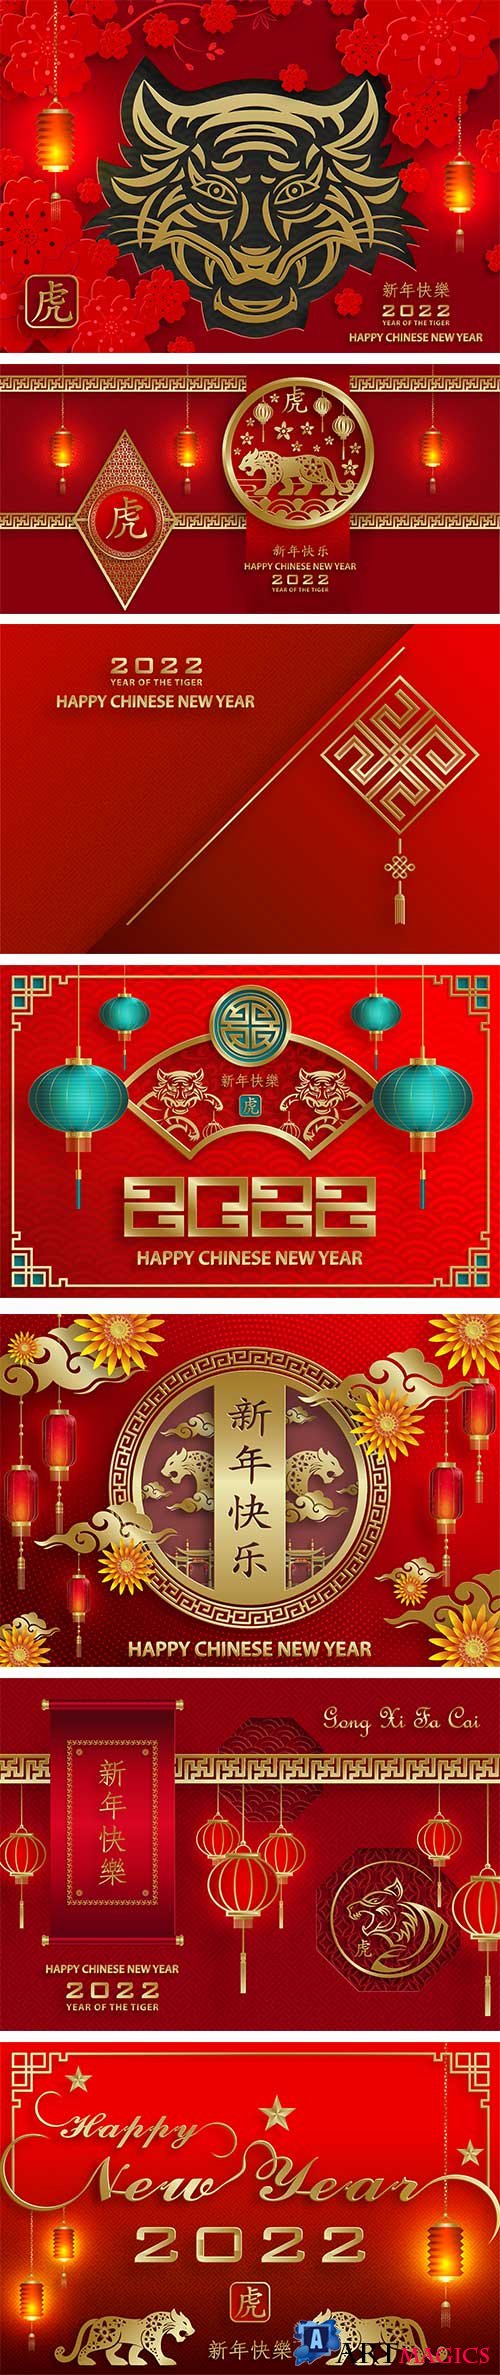 Happy chinese new year 2022, tiger zodiac vector sign